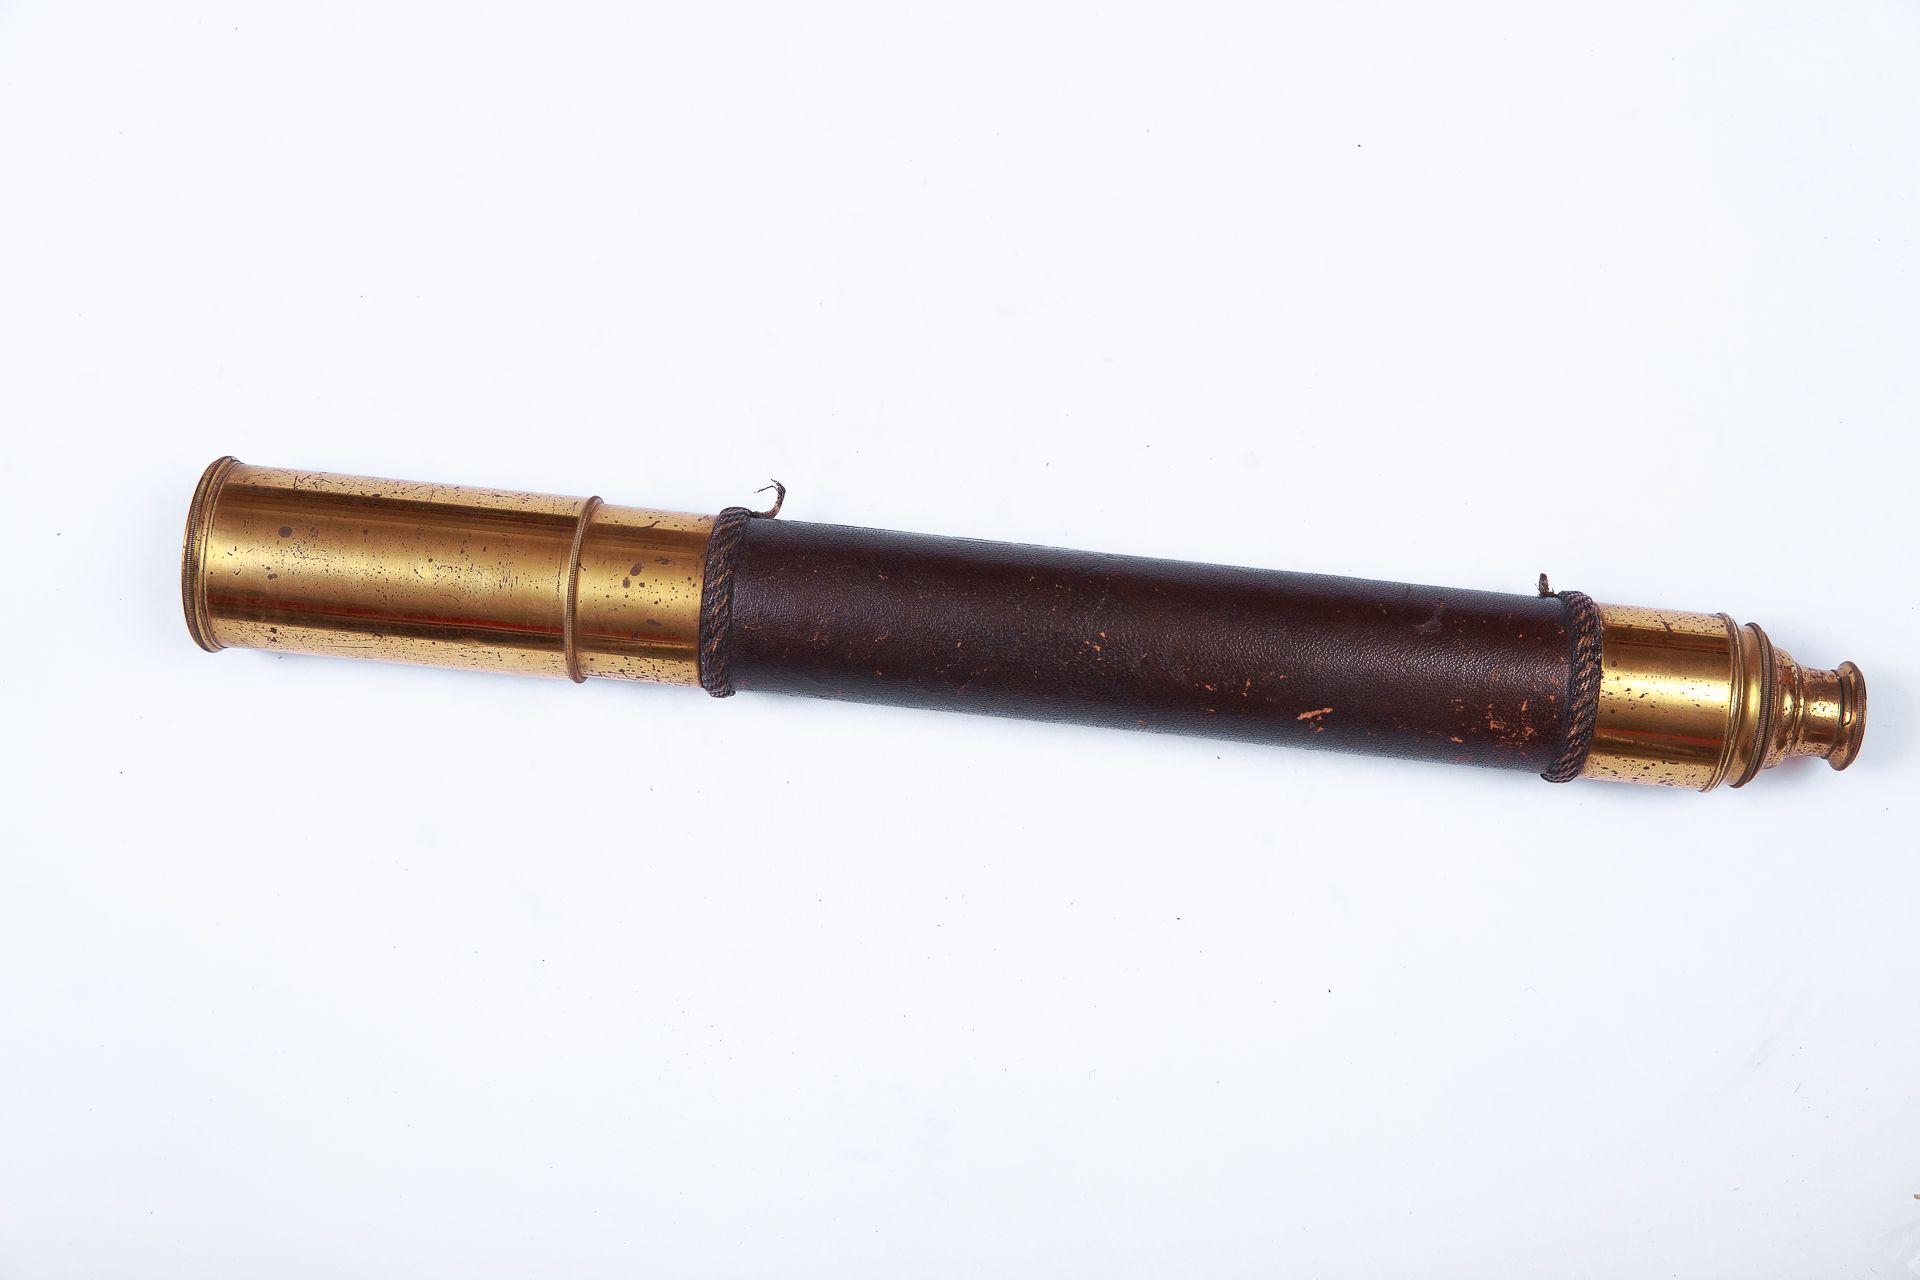 Null A long brass sight sheathed in leather

Length : 90 cm